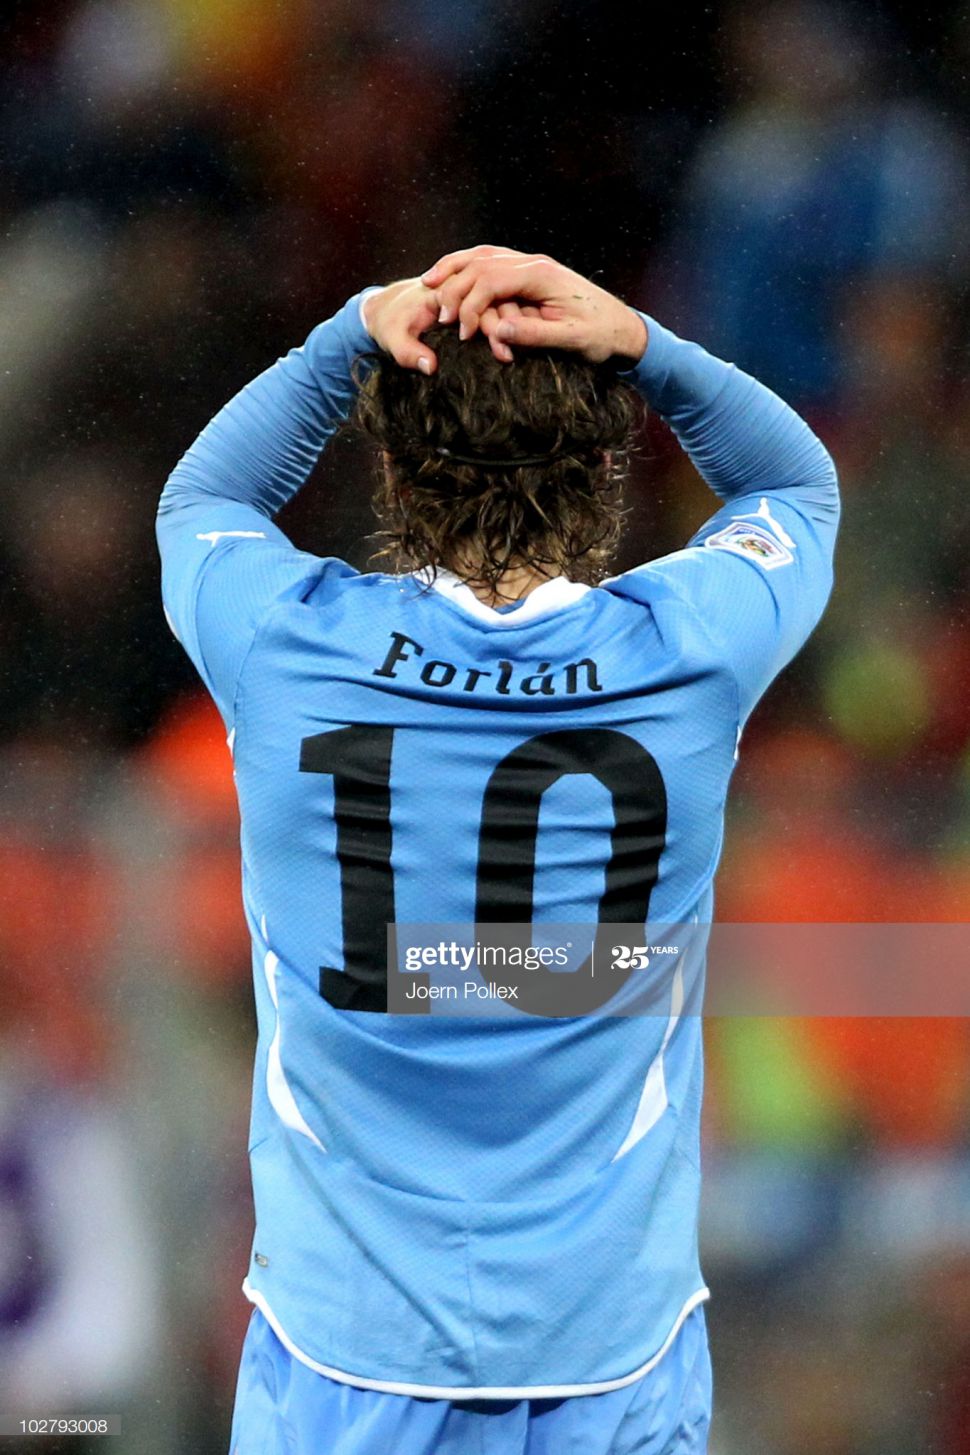 diego forlan 2010 world cup jersey